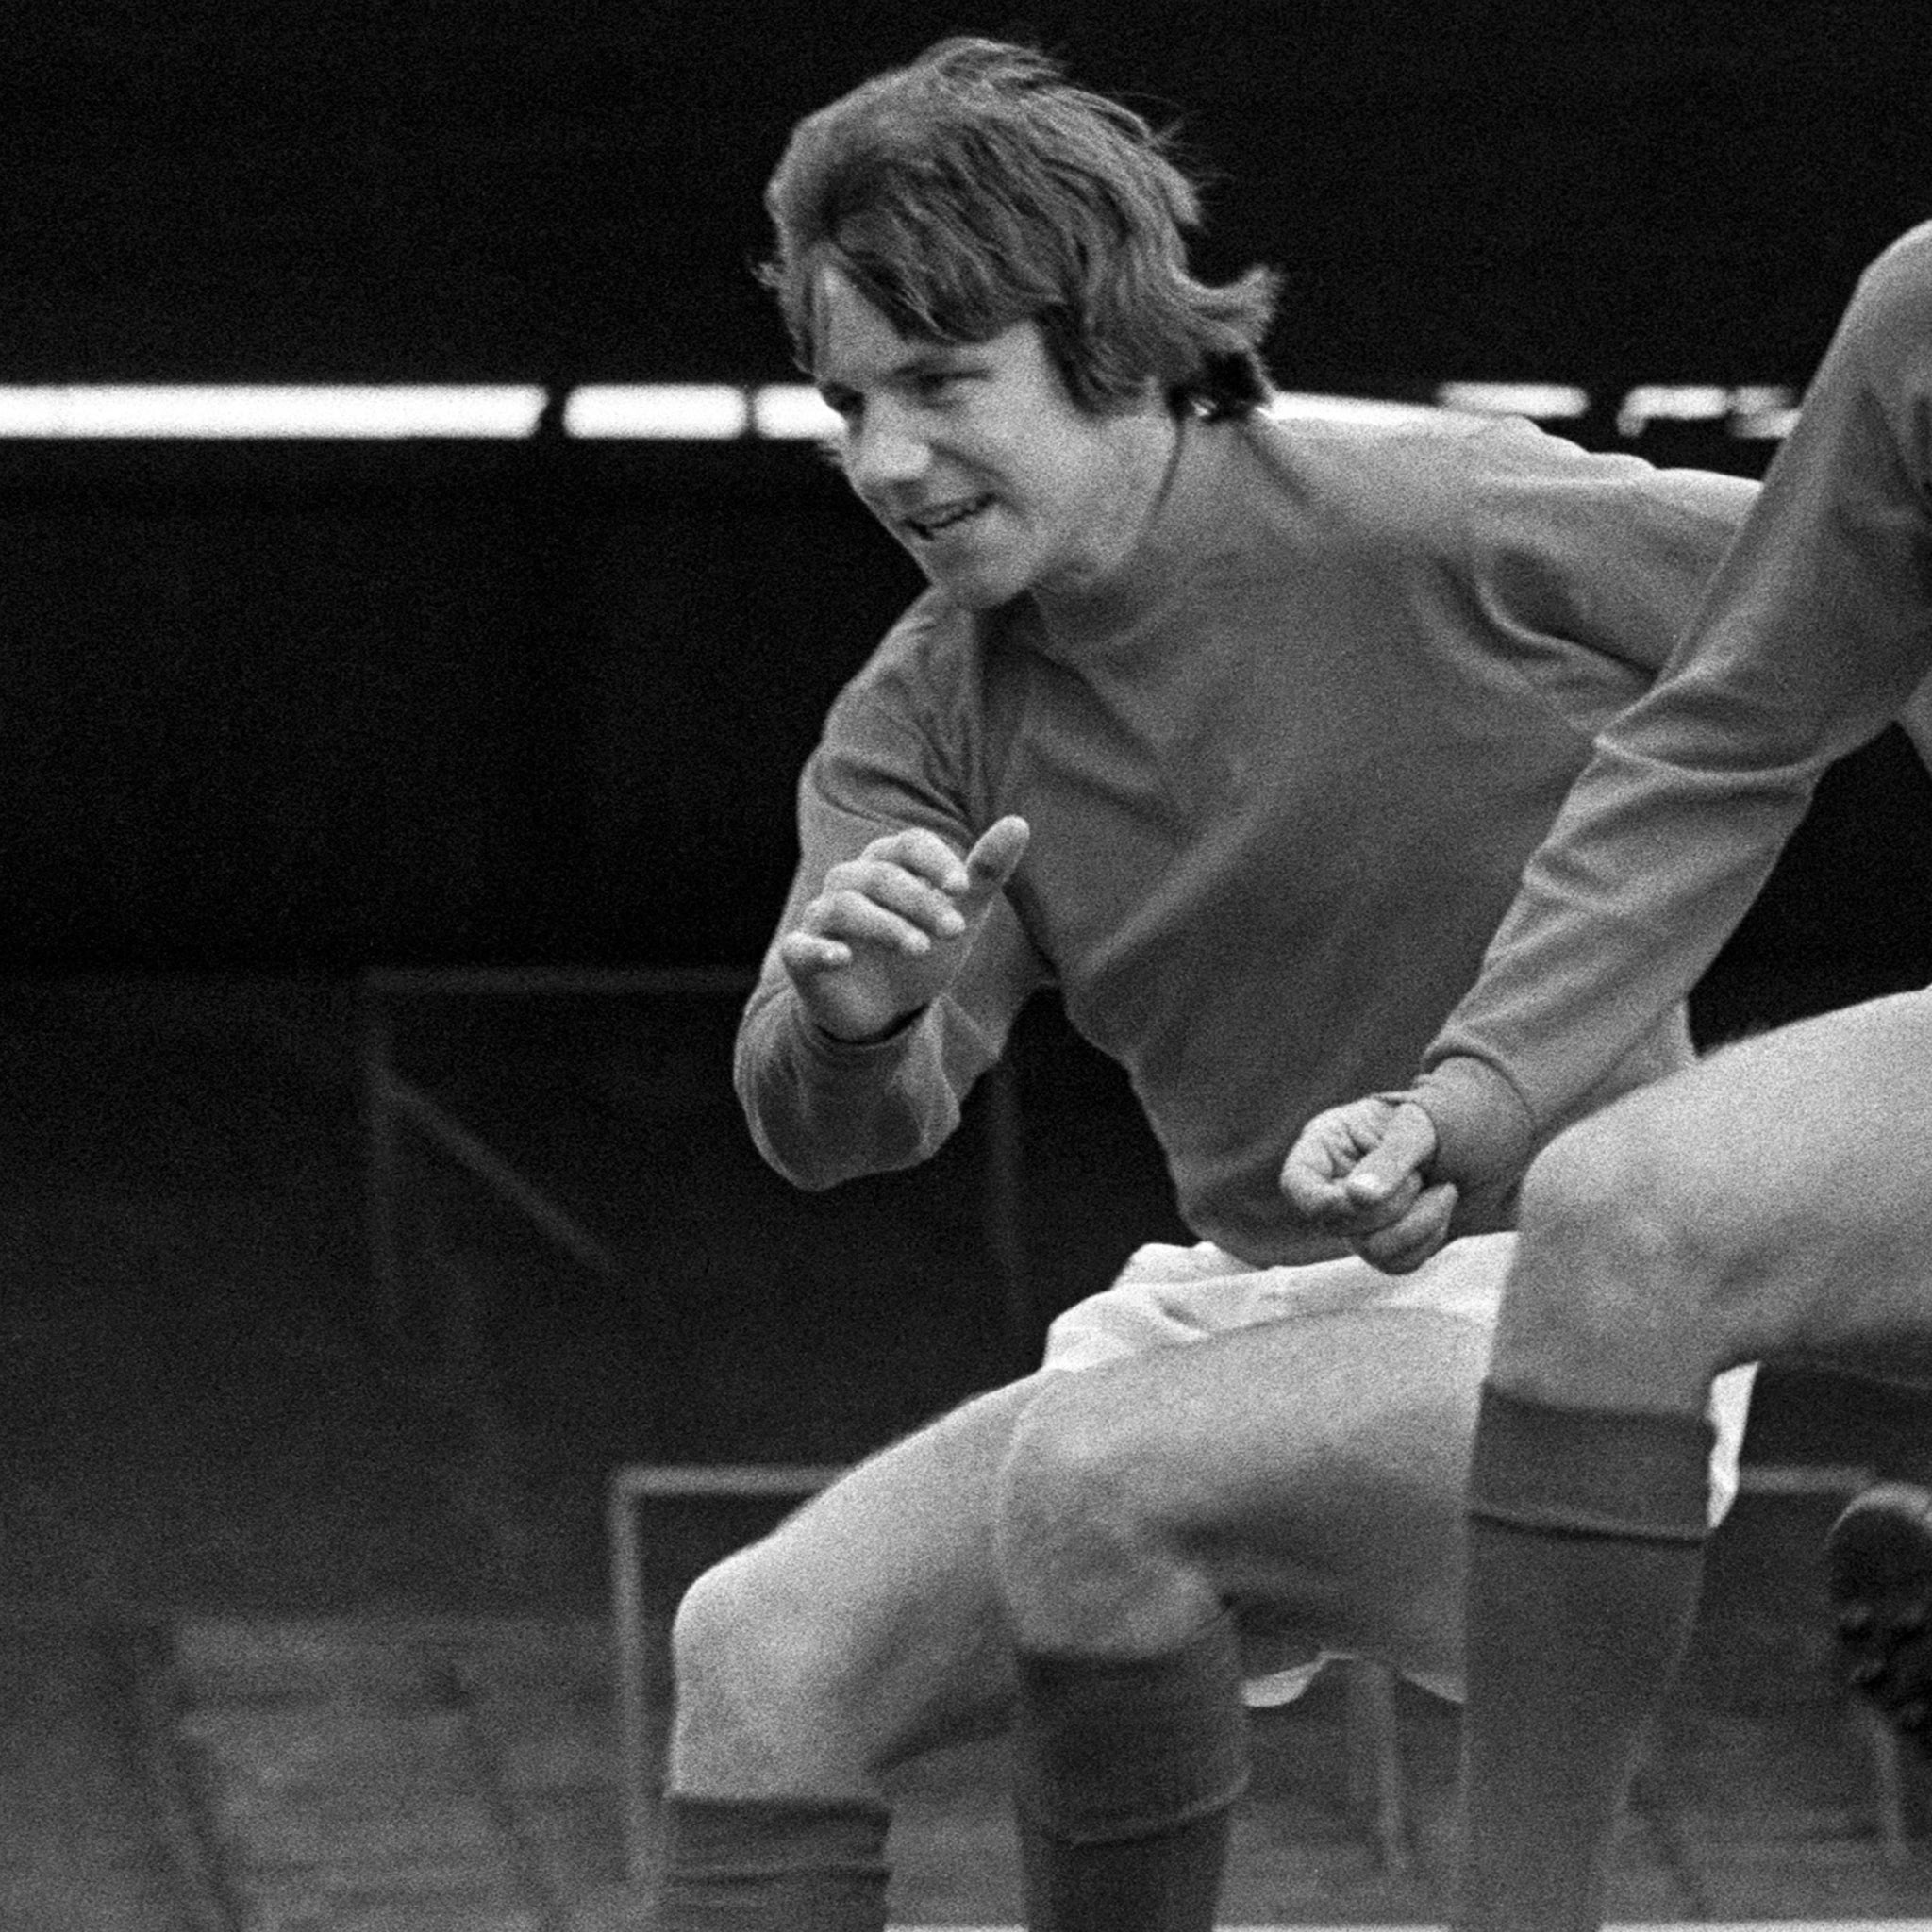 Treacy: while he excelled for Charlton, at West Brom he found himself in the shadow of Jeff Astle